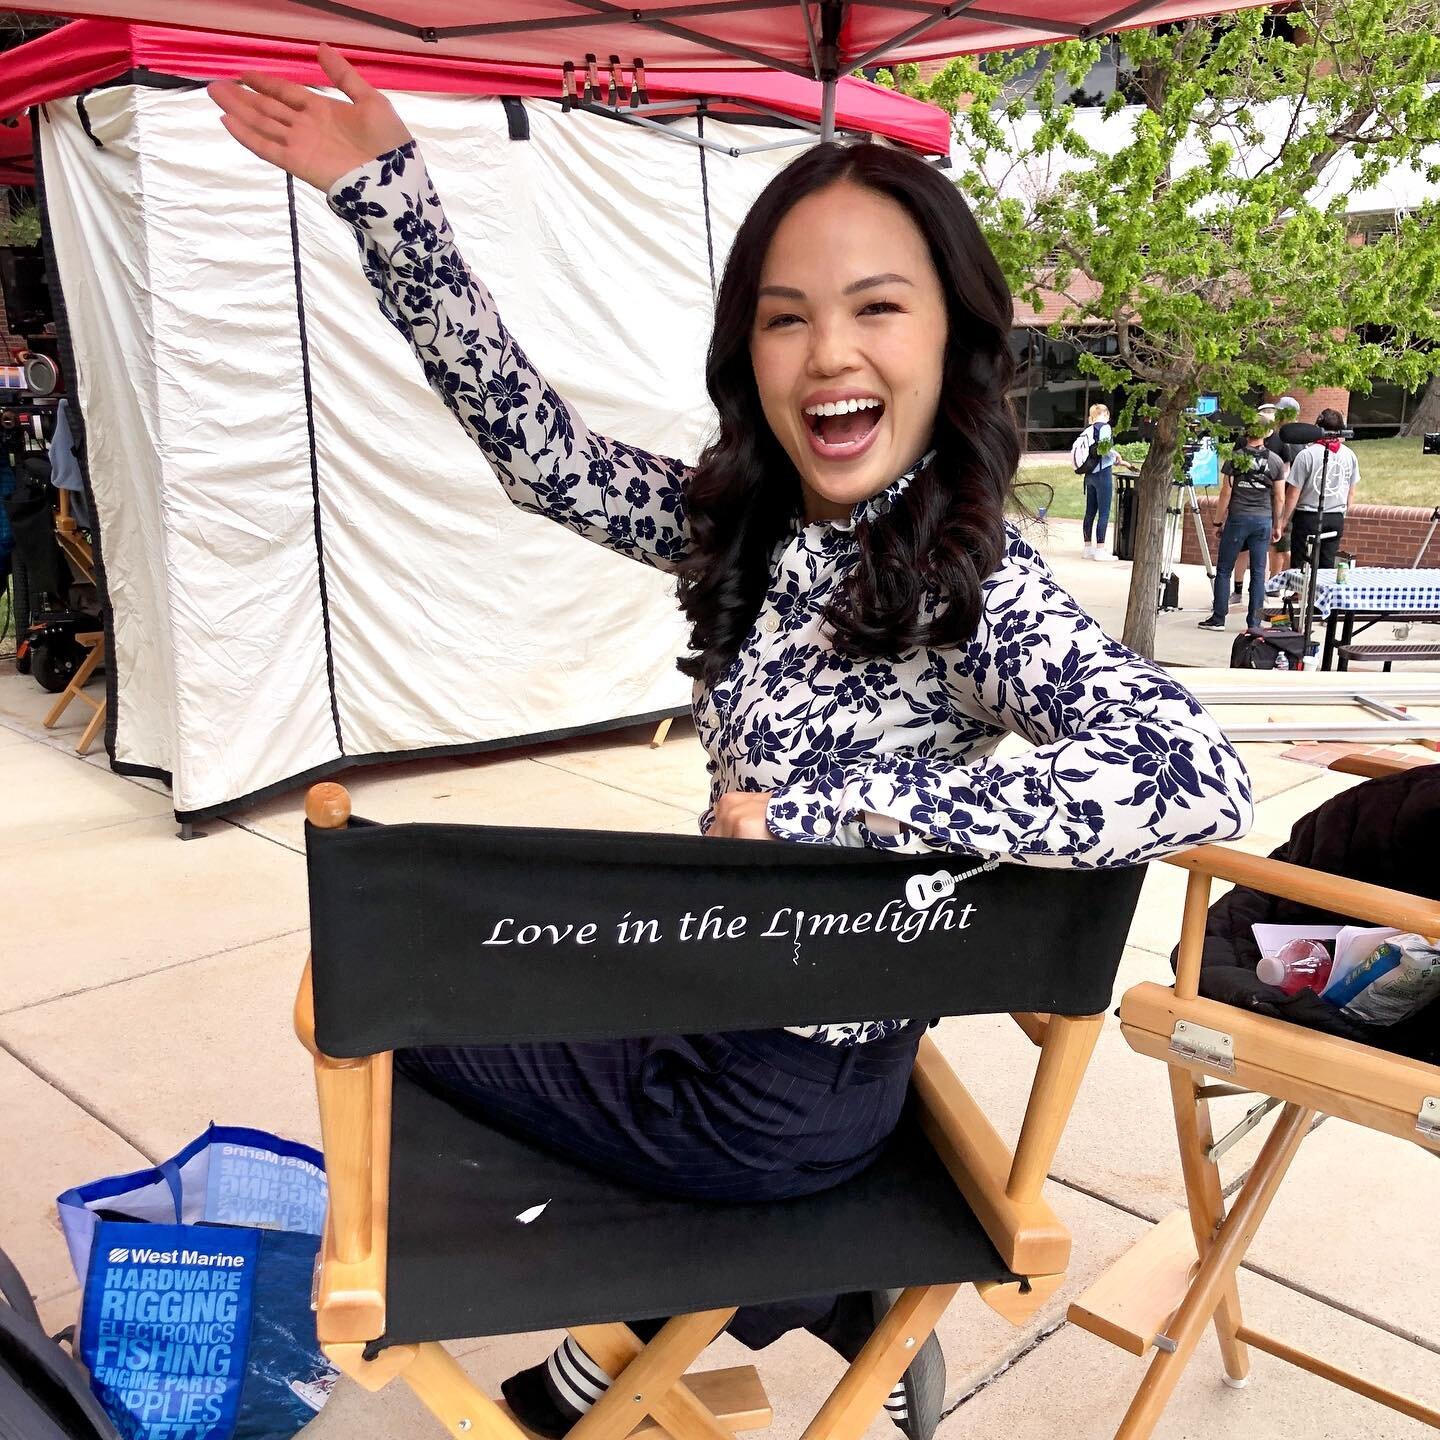 So excited to announce that Love in the Limelight will be premiering on the @hallmarkchannel on Aug 6, 2022 8p EST (6p PST)! 🎉#hallmark #hallmarkchannel #hallmarkmovies